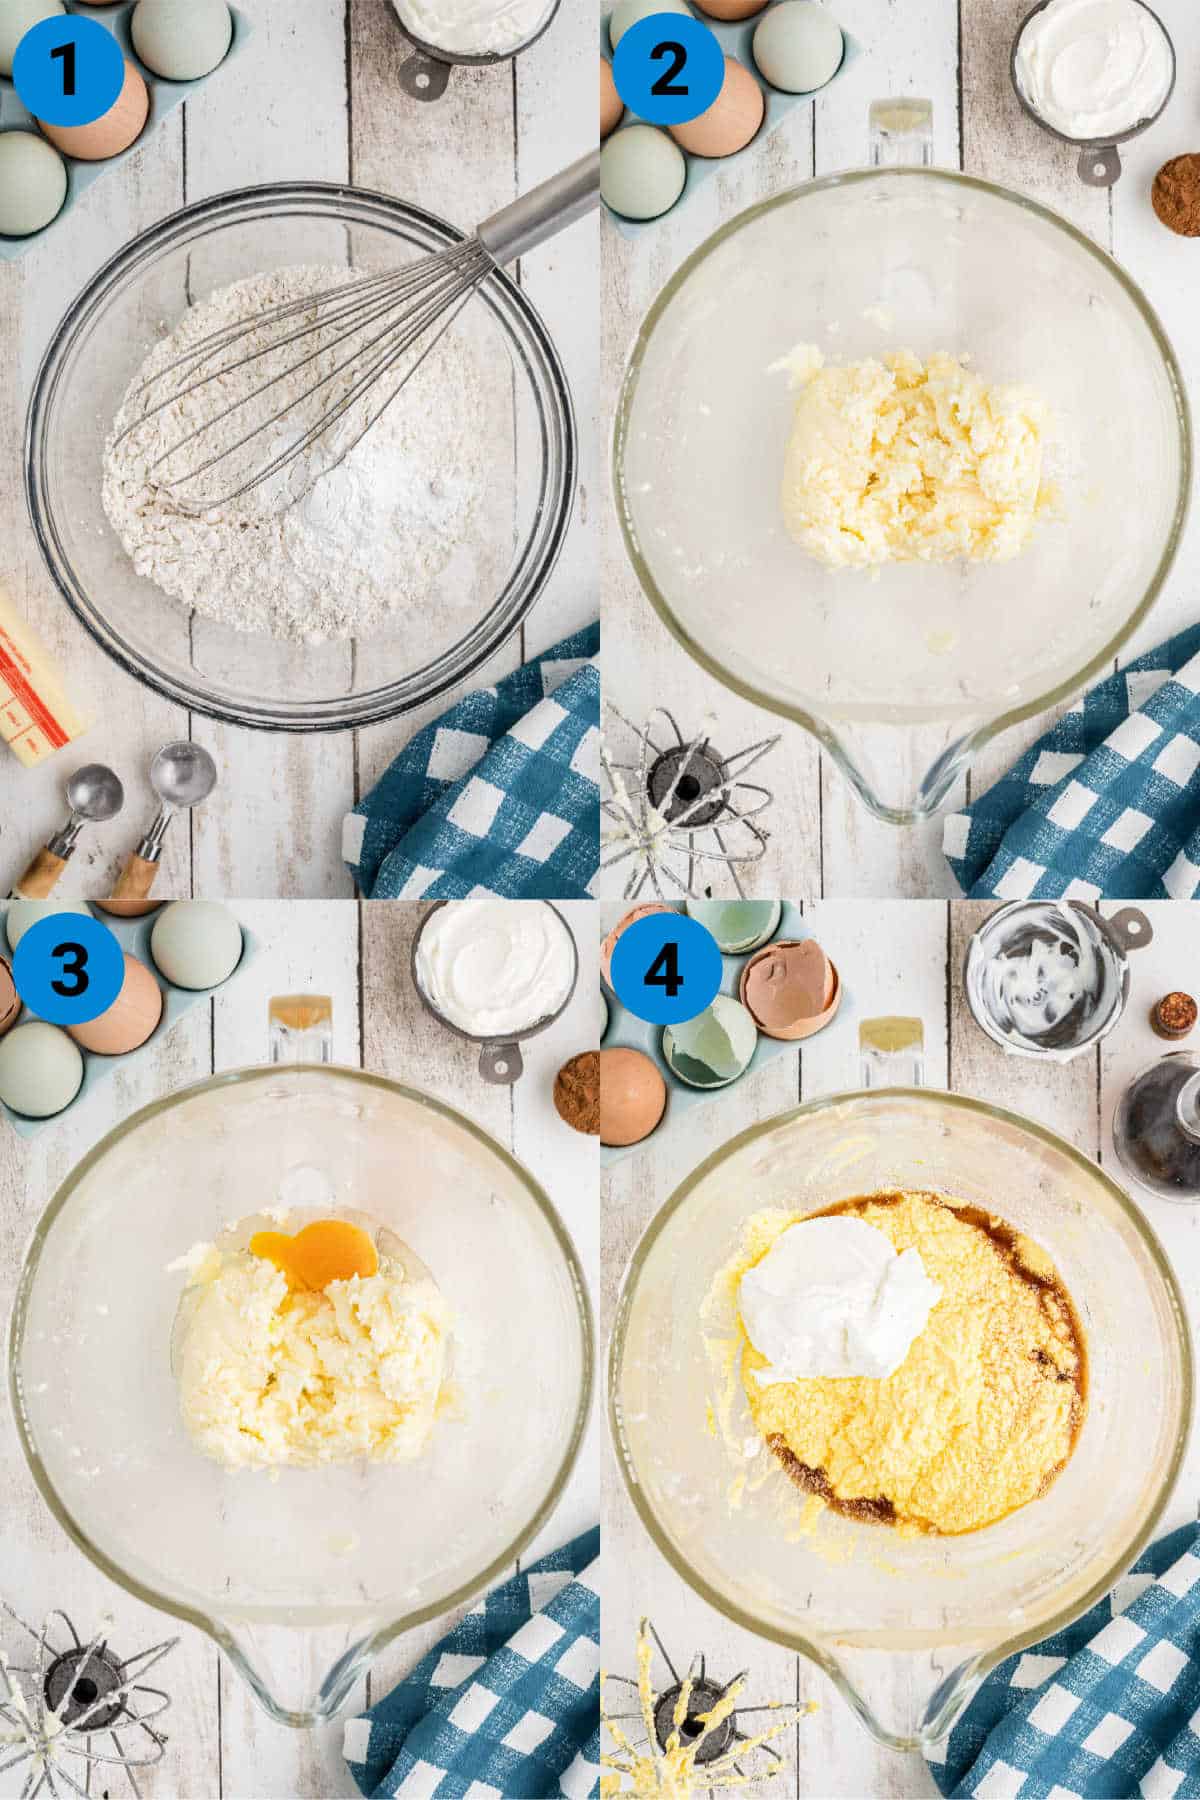 A collage of four images showing how to make a honey bun cake recipe from scratch, steps 1 through 4.